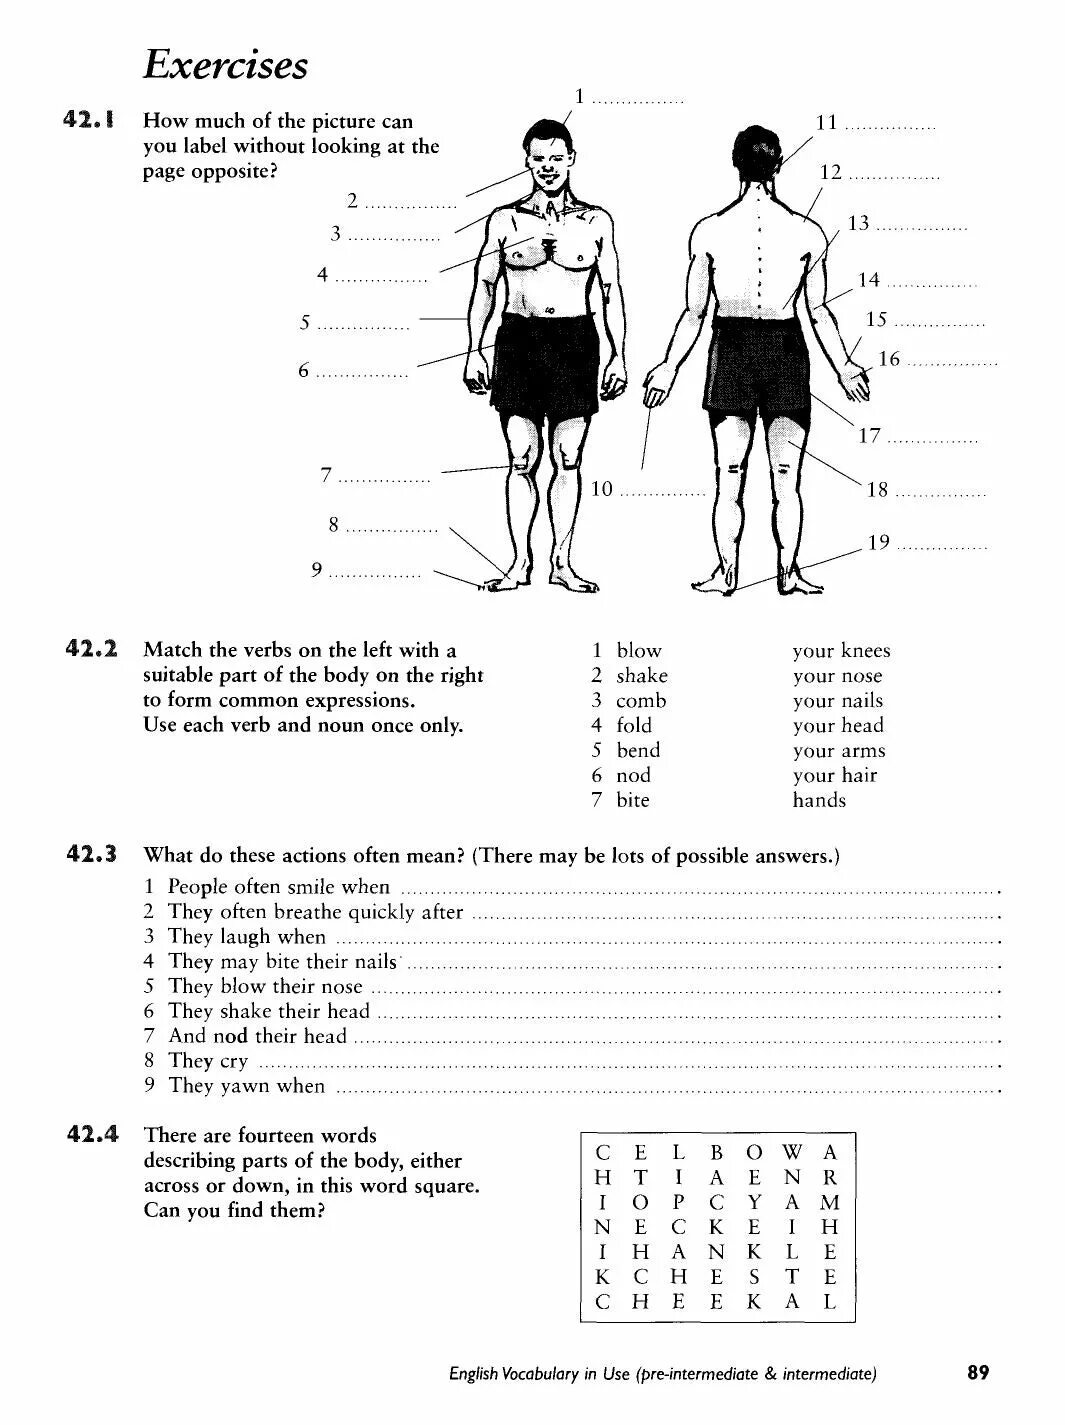 Body Parts pre Intermediate. How much of the picture can you Label without looking at the Page opposite. English Vocabulary in use. Label body Parts. Use the words to label the